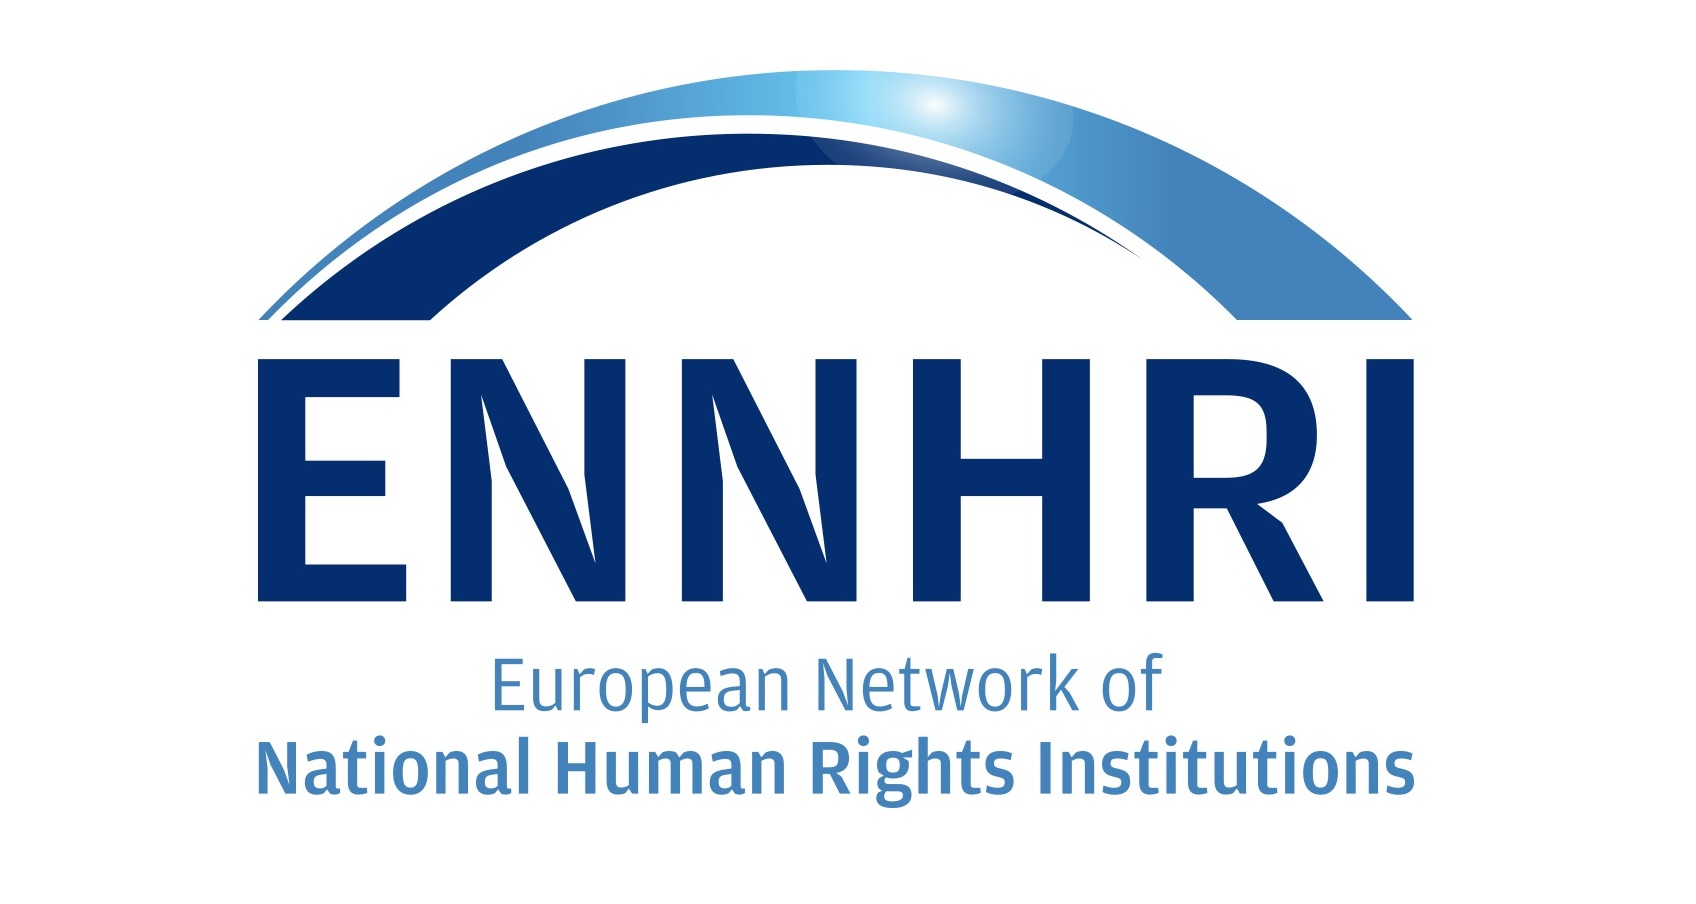 European Network of National Human Rights Institutions - ENNHRI